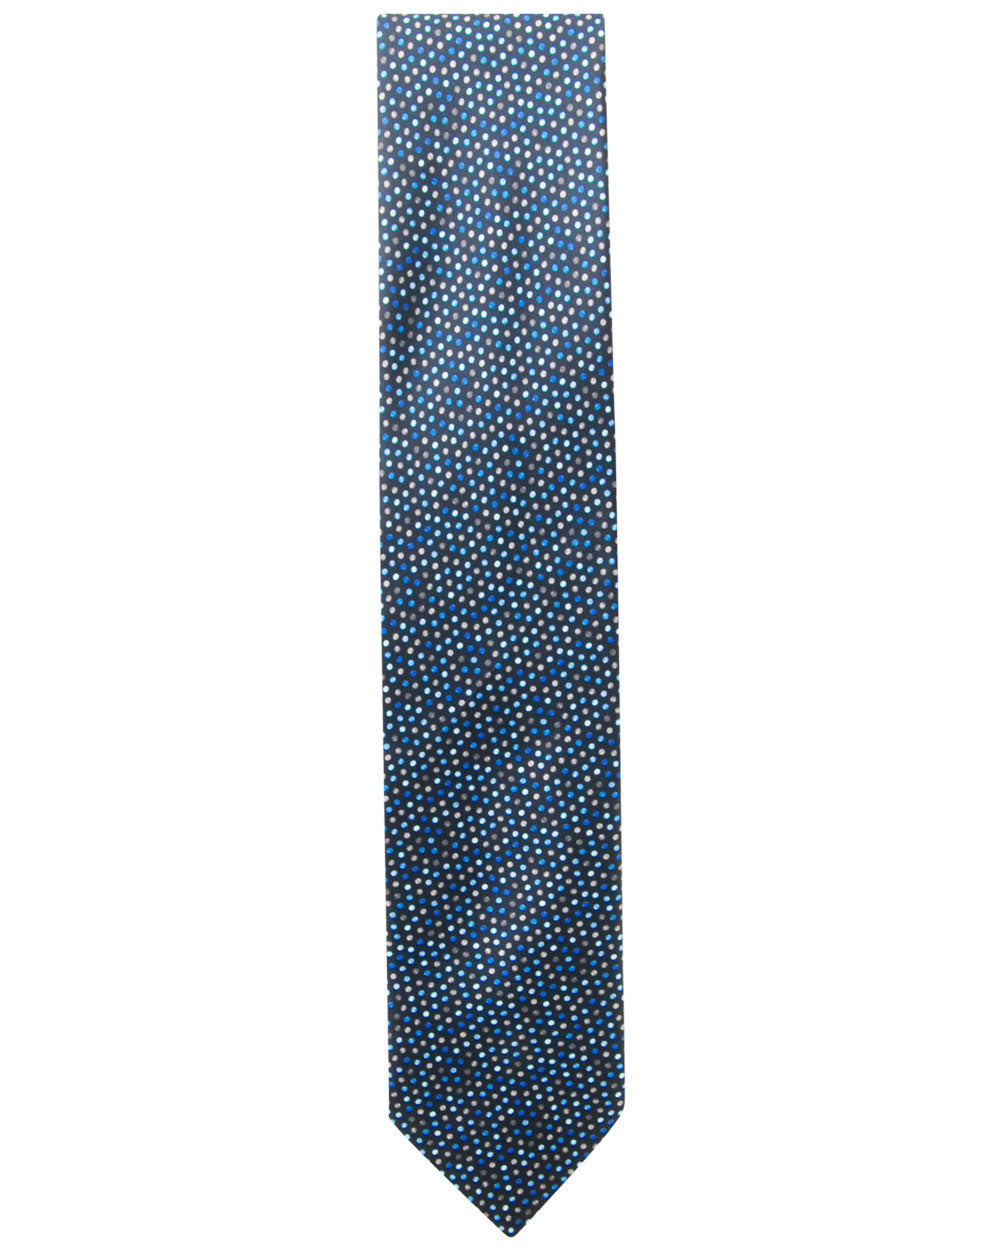 Navy and Bright Blue Microdotted Tie